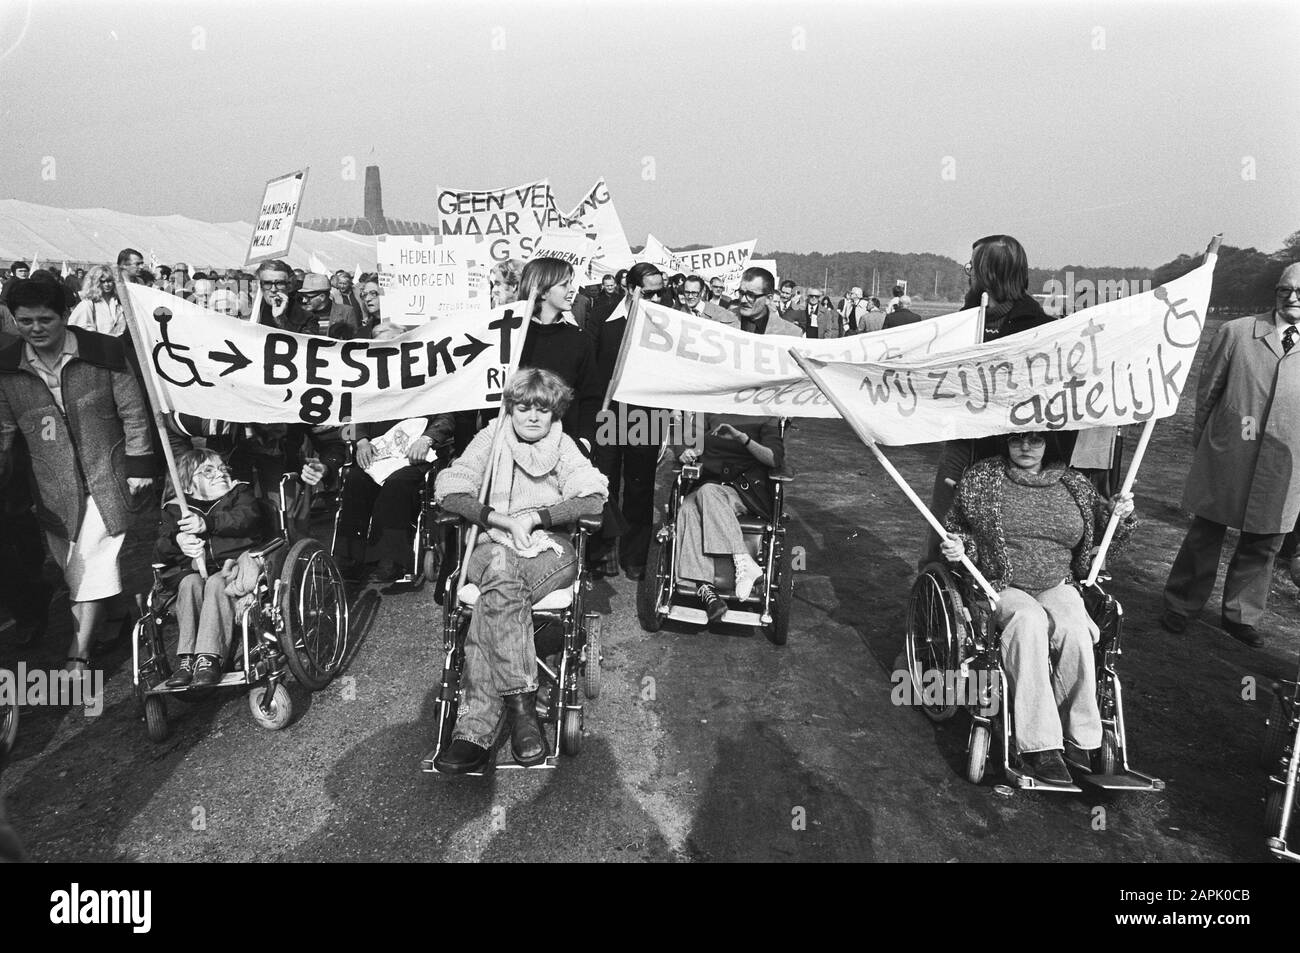 The Hague, demonstration people with social benefits against austerity Cutlery 81; number of disabled people during demonstration Date: October 3, 1978 Location: The Hague, Zuid-Holland Keywords: SUMMARY, INVALIDES, demonstrations Stock Photo